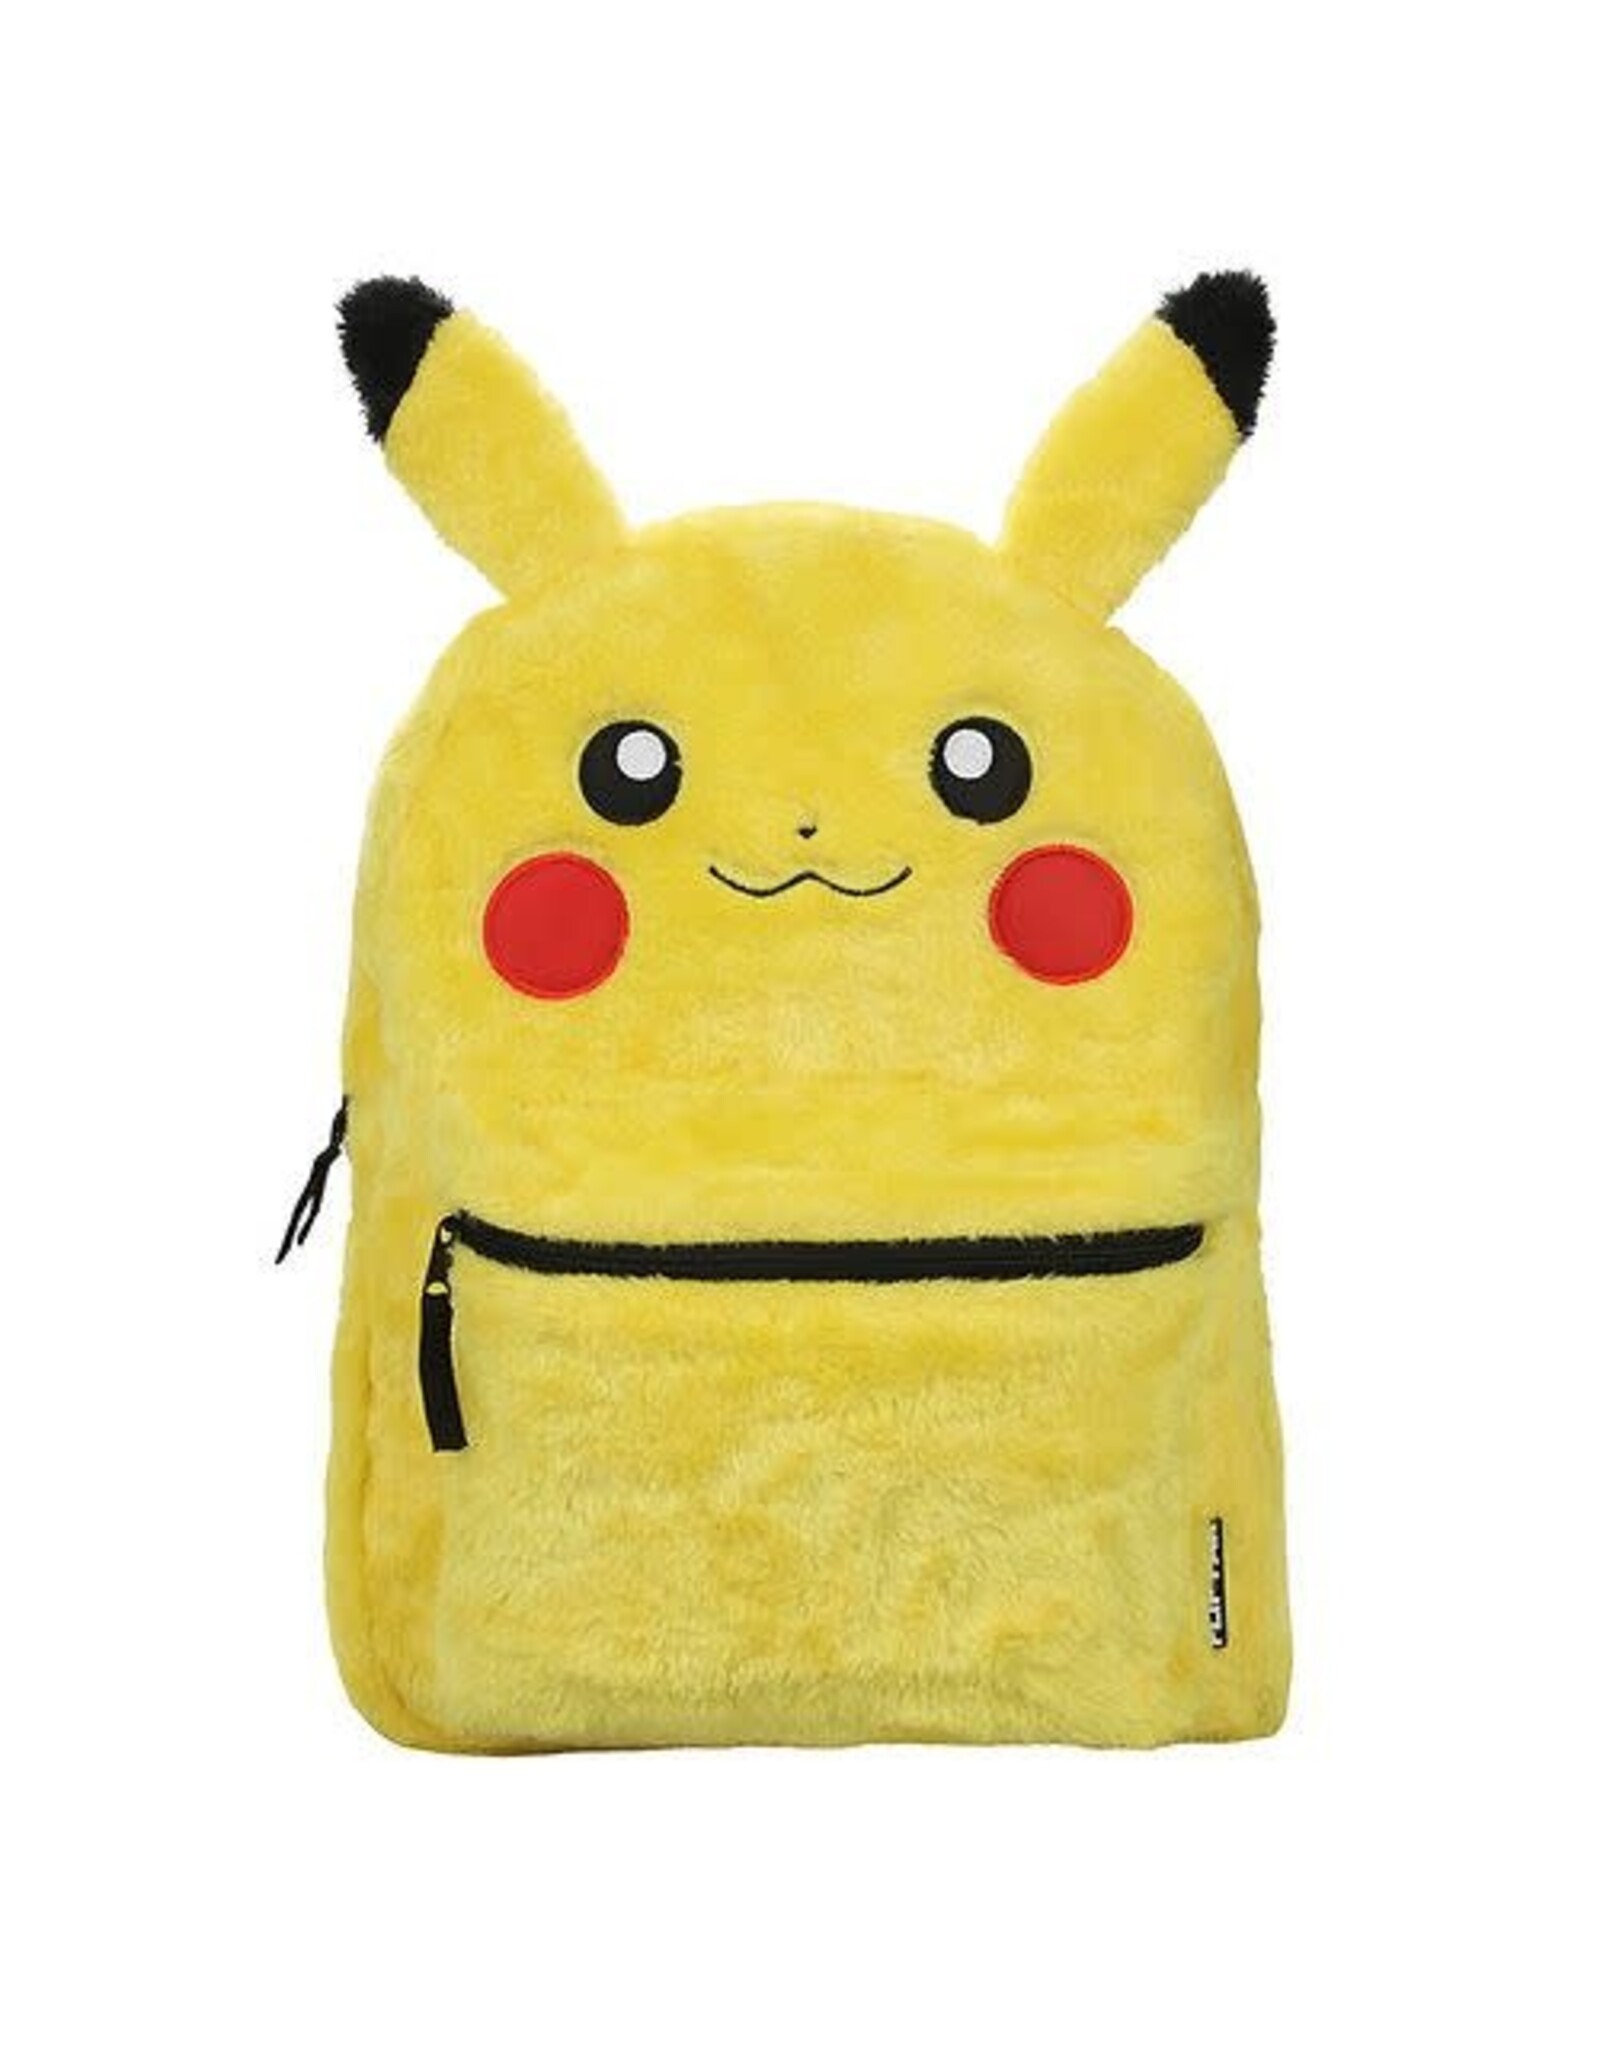 Bioworld Pokemon Pikachu Action Reversible 16" Plush Backpack with Ears